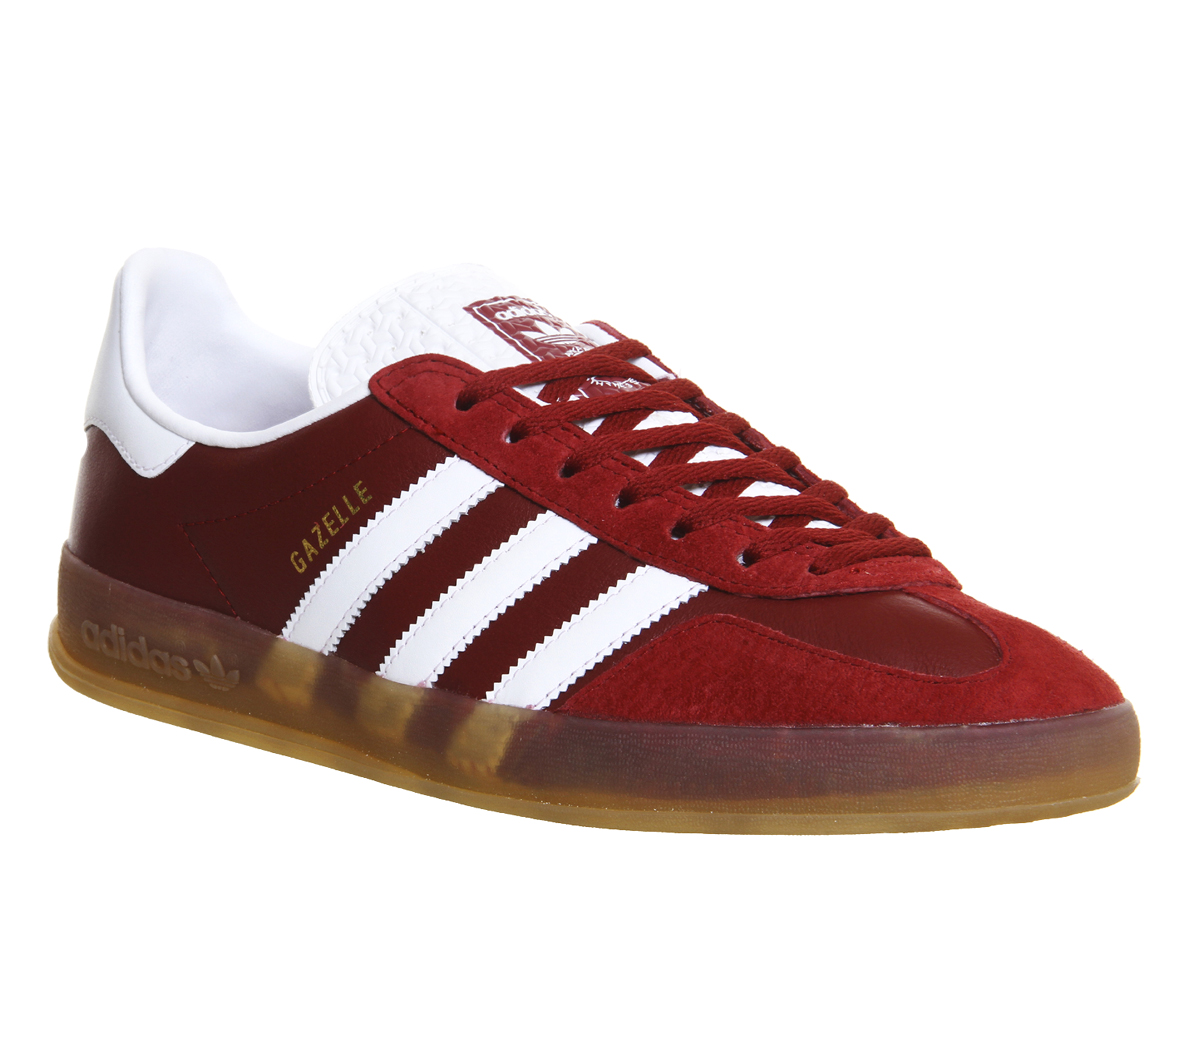 adidas gazelle white and red